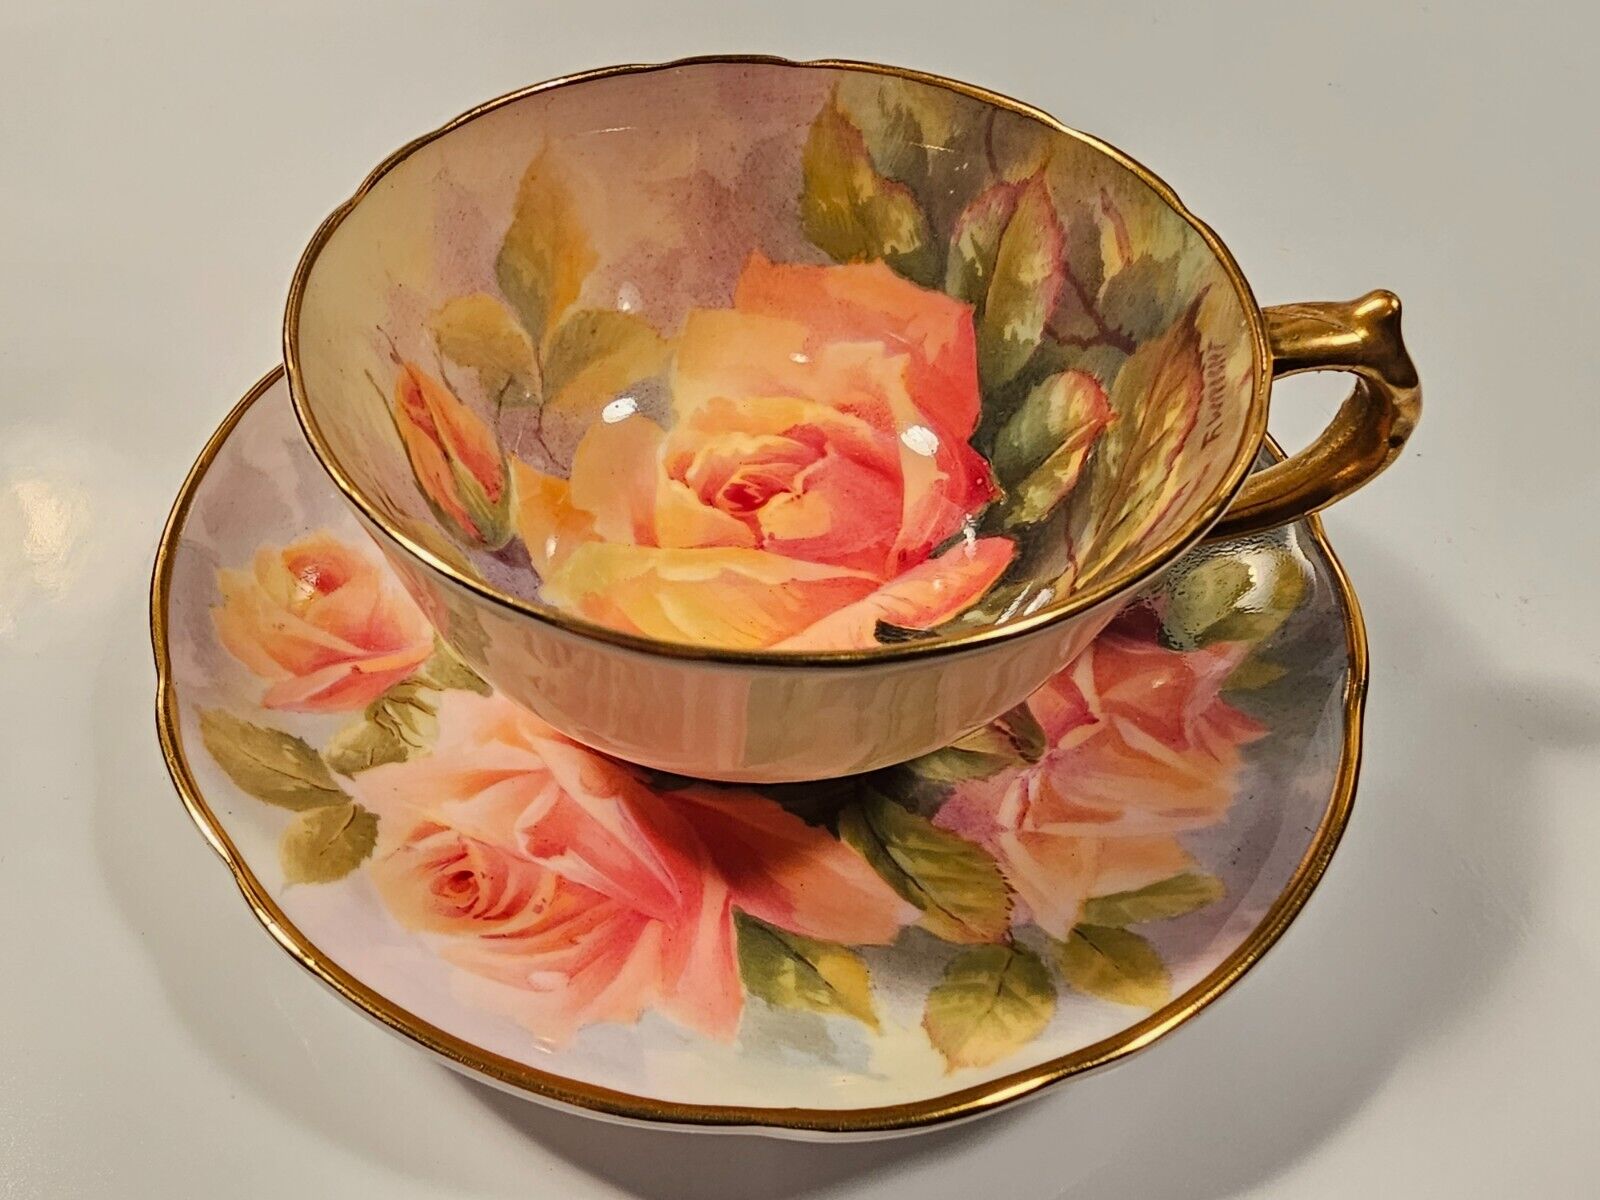 PARAGON SIGNED (FRED) F. WRIGHT DEMITASSE TEACUP & SAUCER SET PEACH CABBAGE ROSE